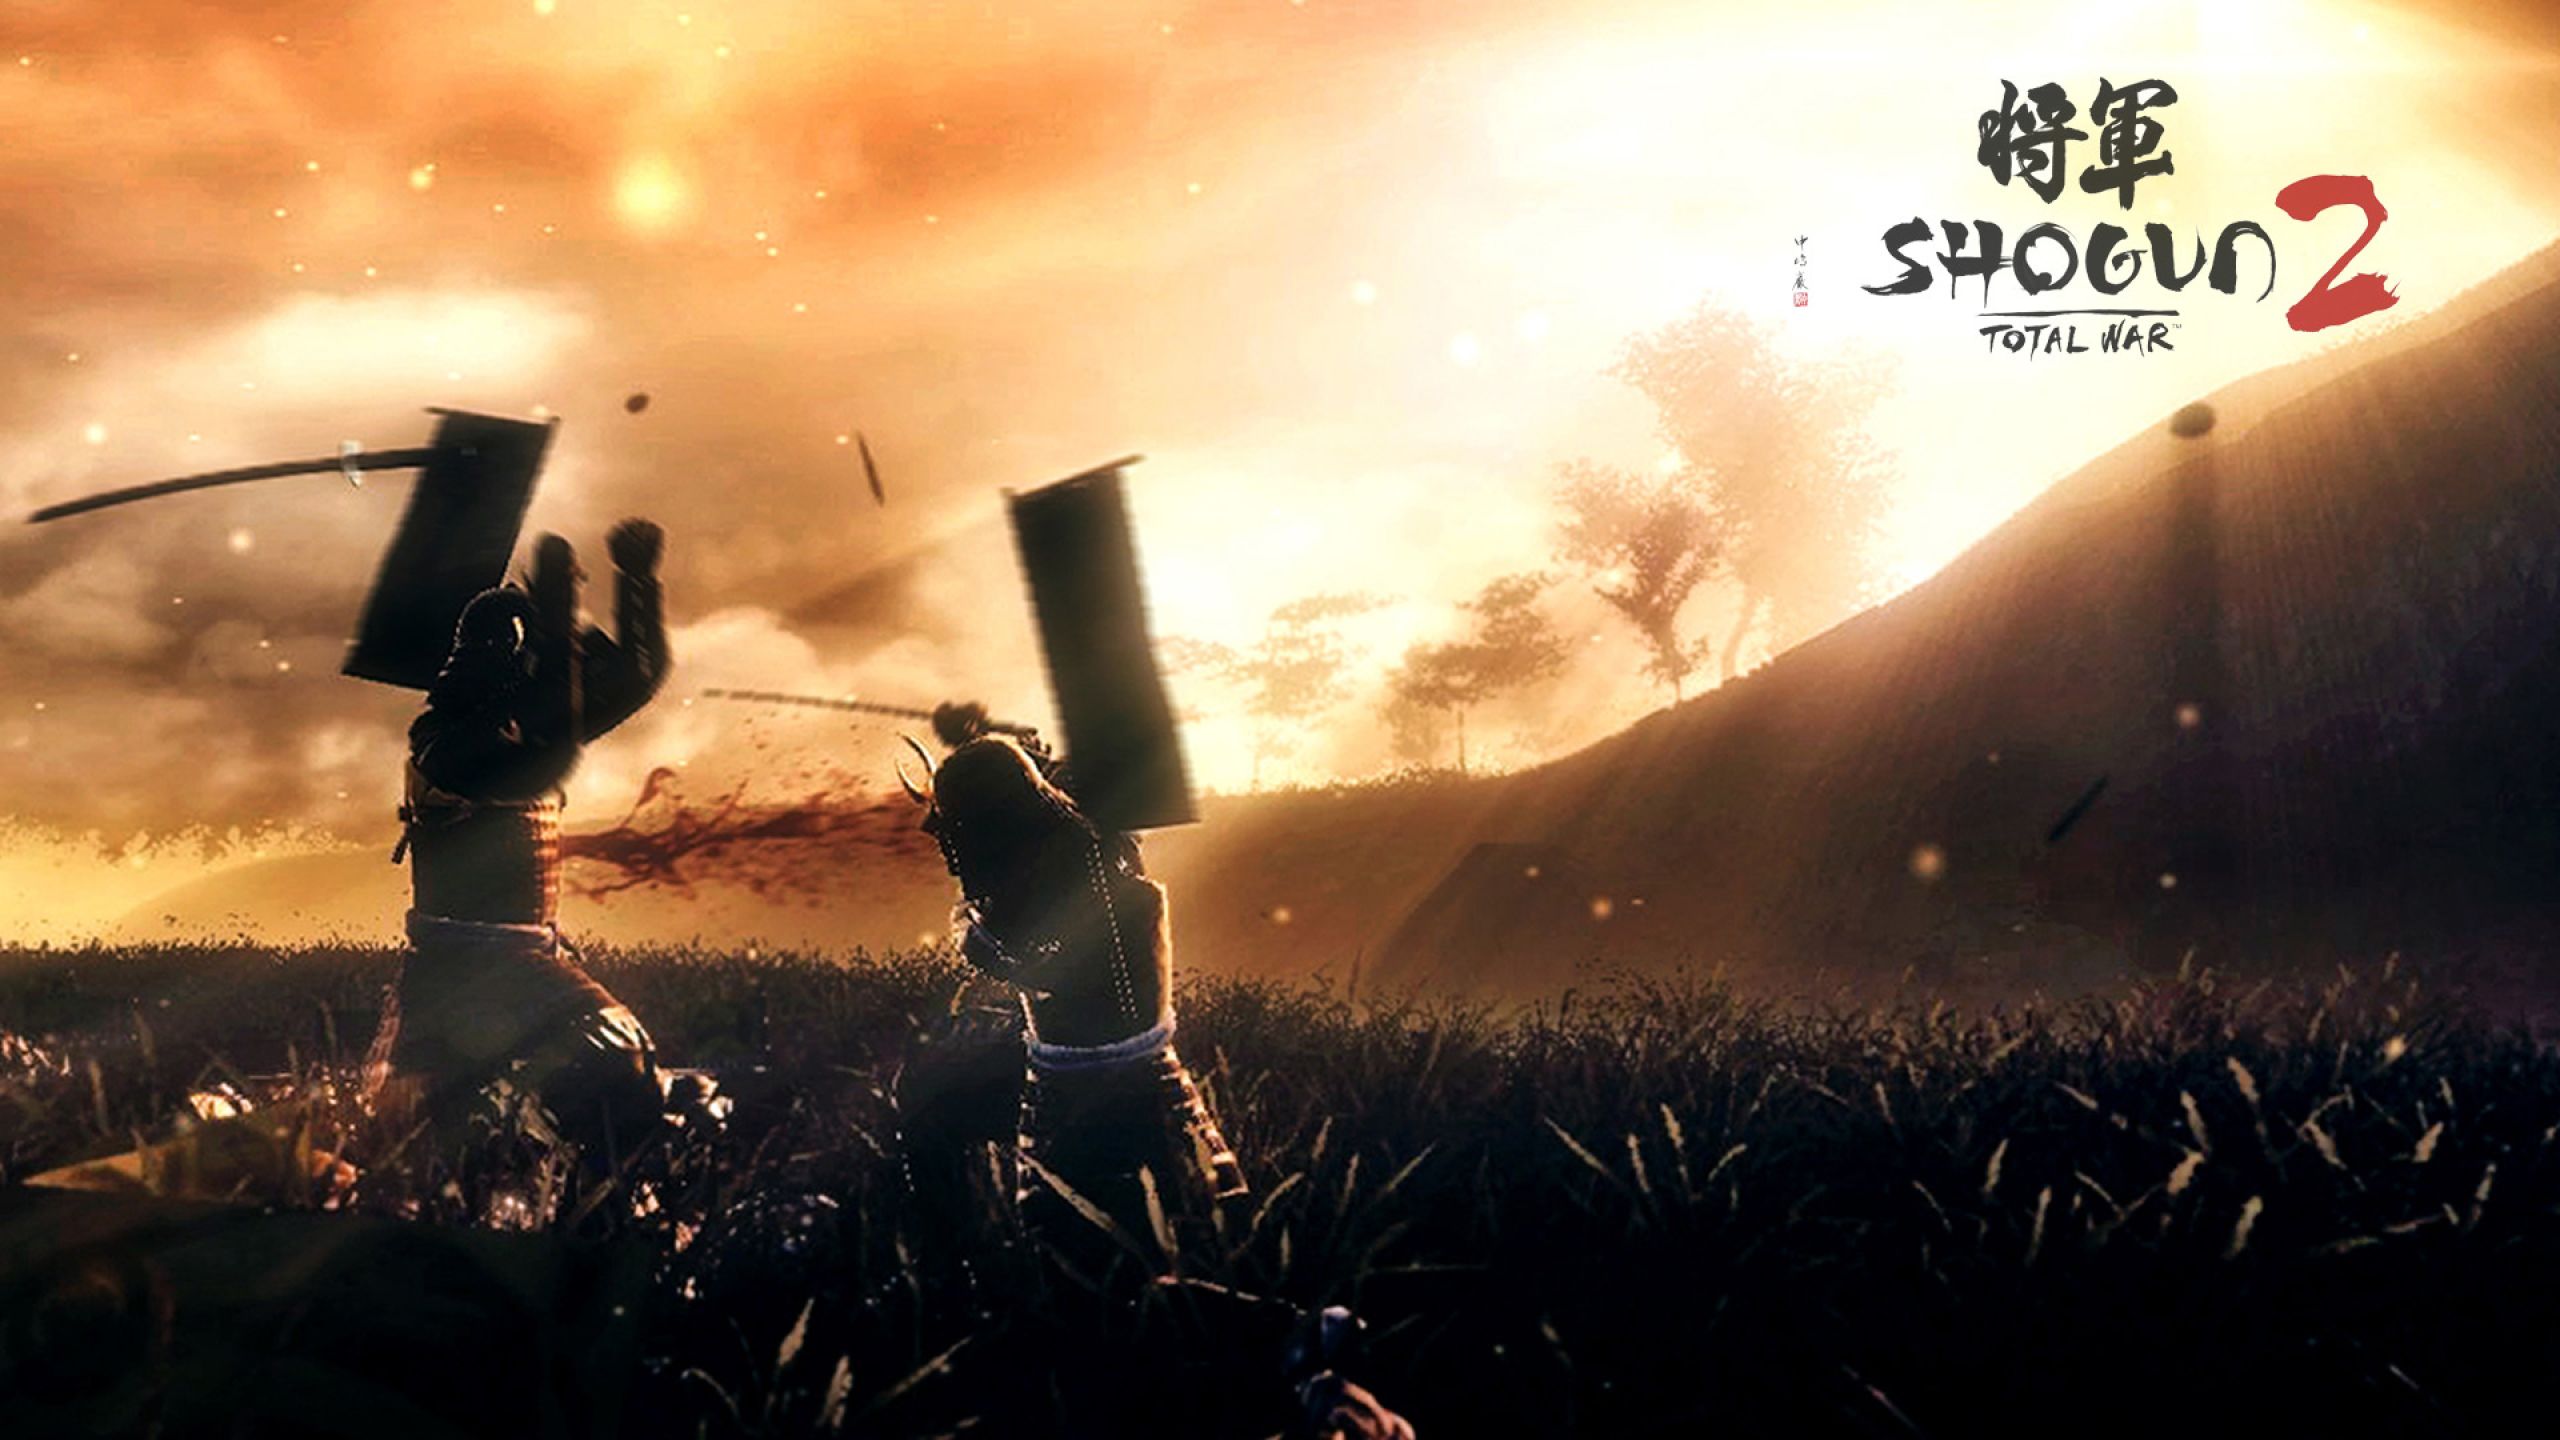 shogun total war, the creative assembly 1440P Resolution Wallpaper, HD Games 4K Wallpaper, Image, Photo and Background